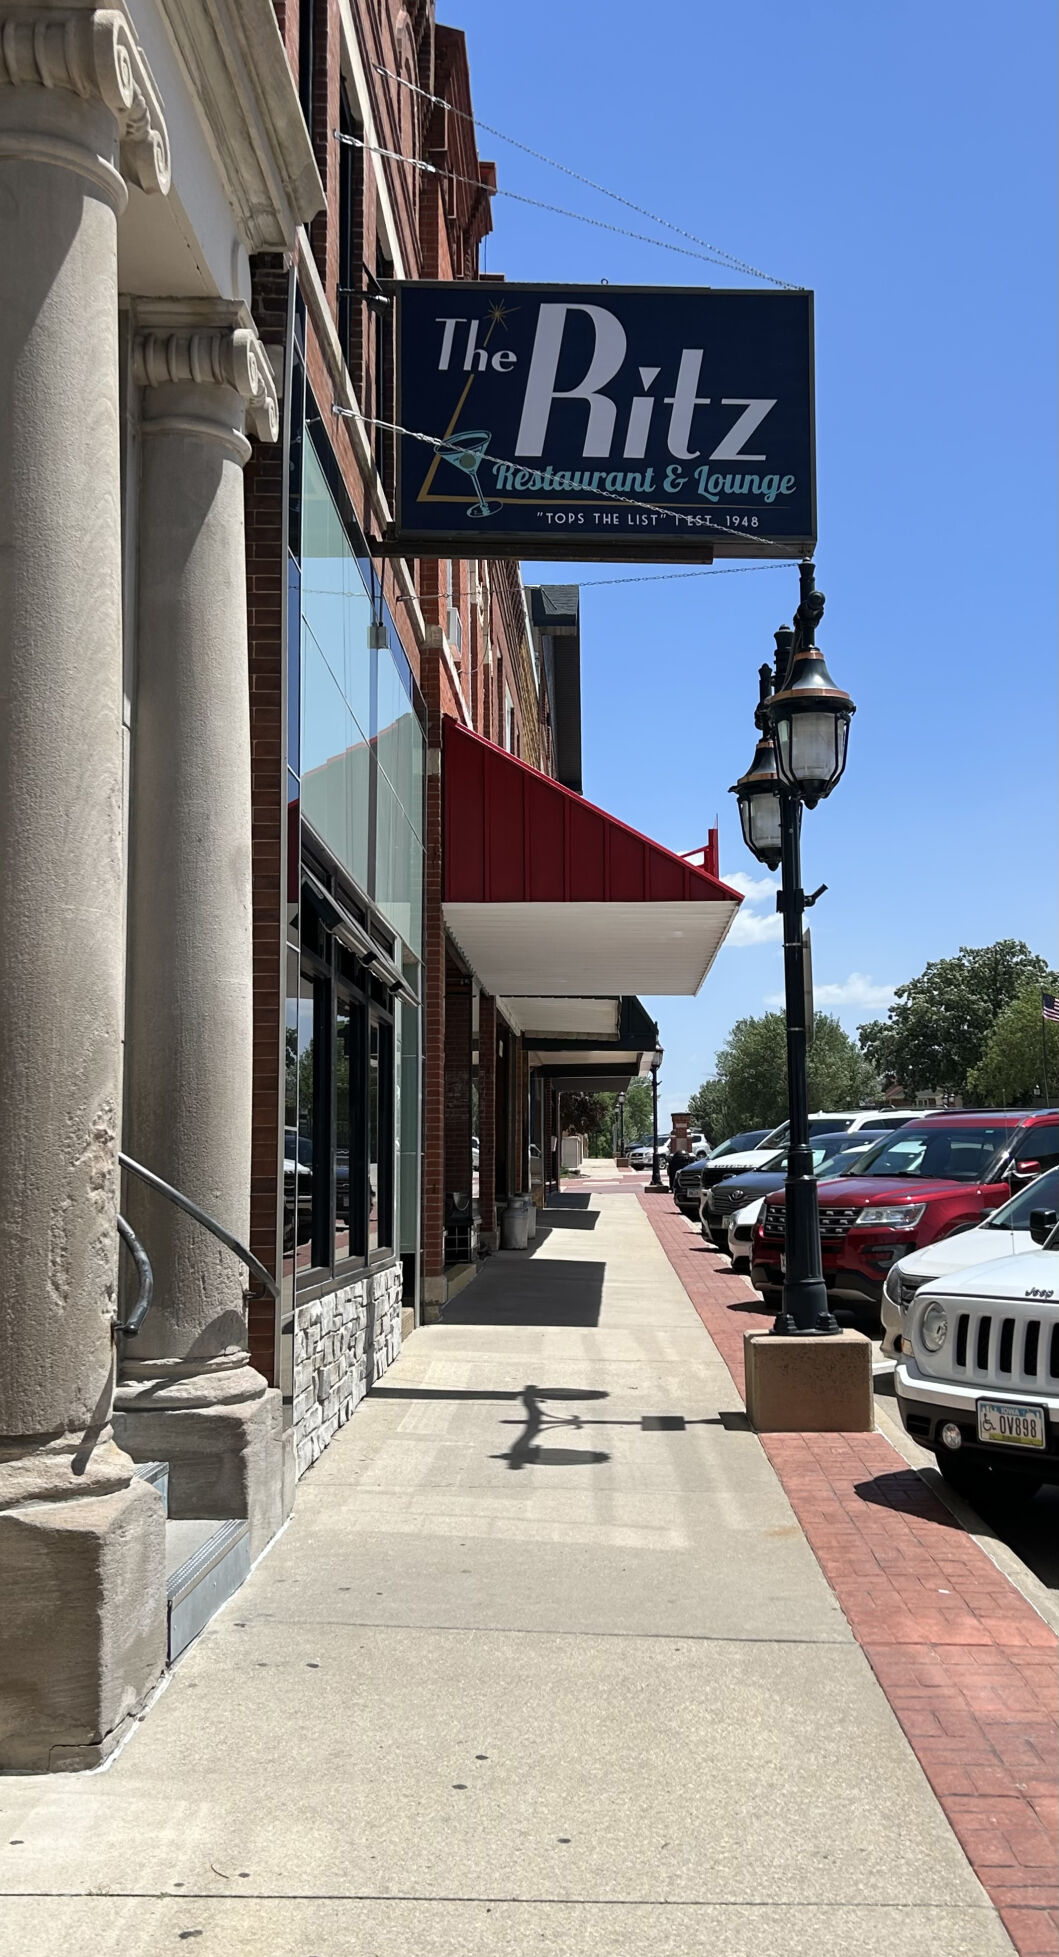 The Ritz is located at 232 First Ave. E. in Dyersville. The restaurant is open for dinner Tuesday through Saturday.    PHOTO CREDIT: Erik Hogstrom Telegraph Herald